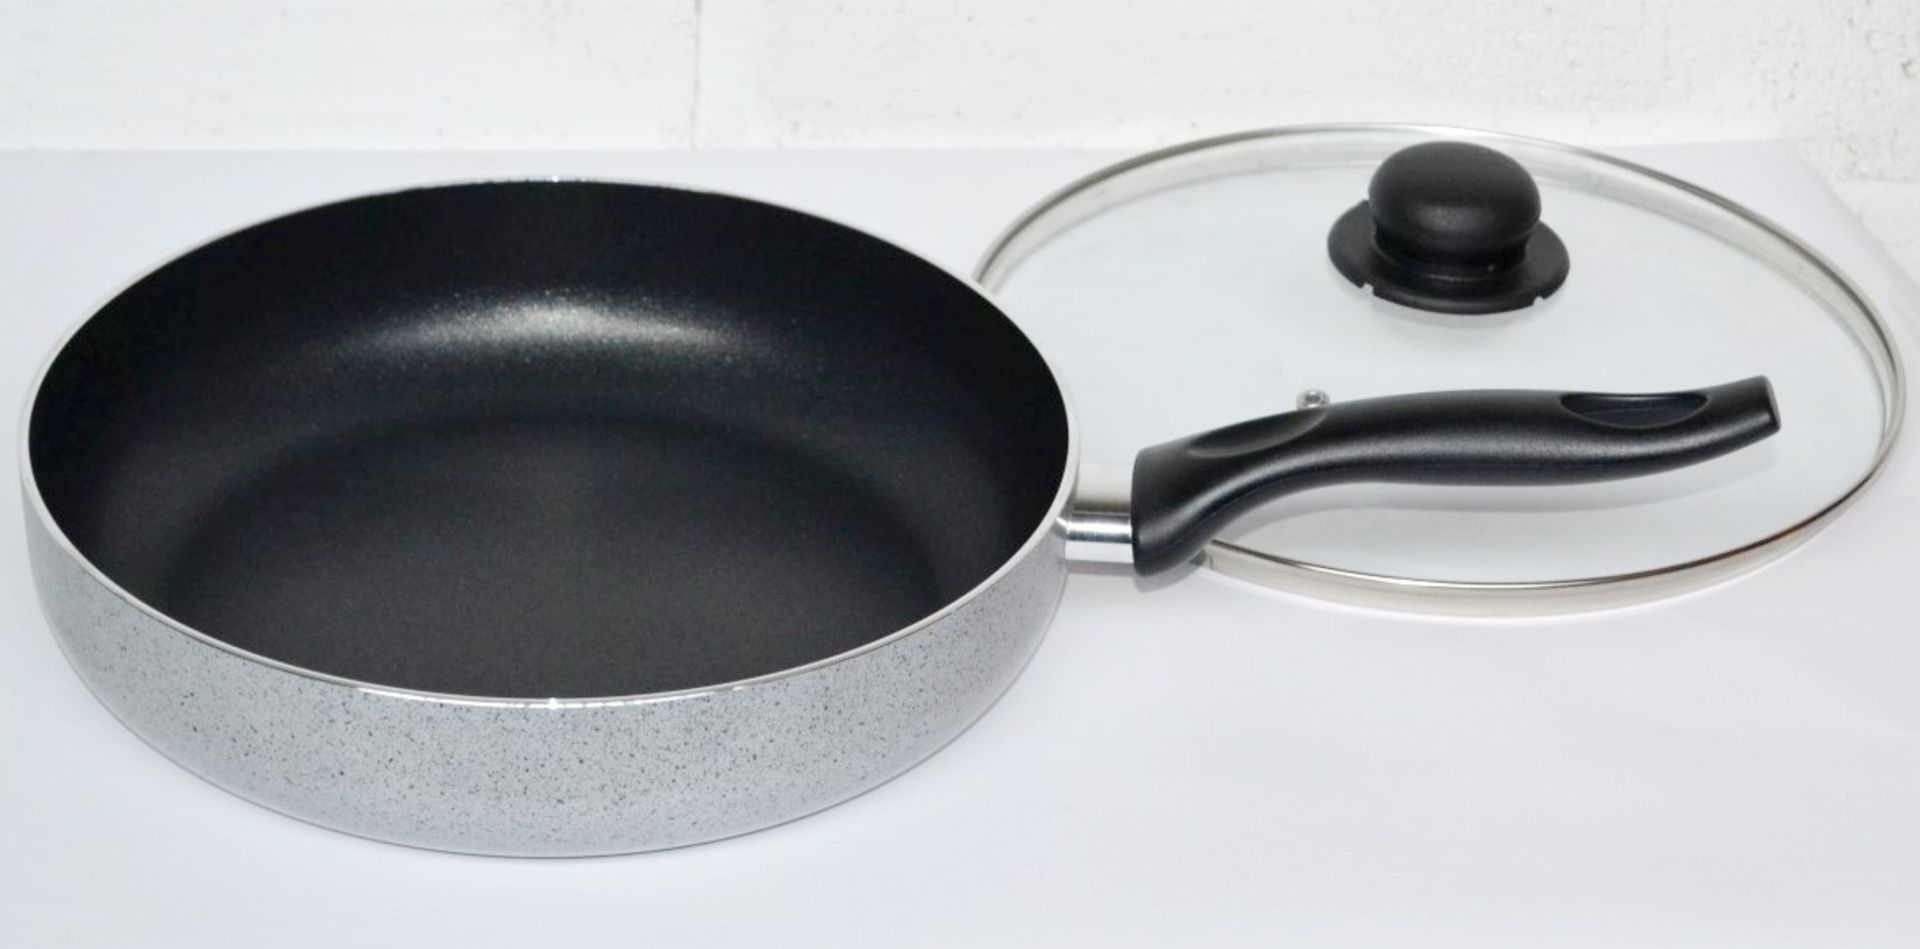 6 x 28cm Non-stick Frying Pans with Glass Lids - 2 Colours Supplied - Made In Italy - New & Sealed - Image 2 of 7